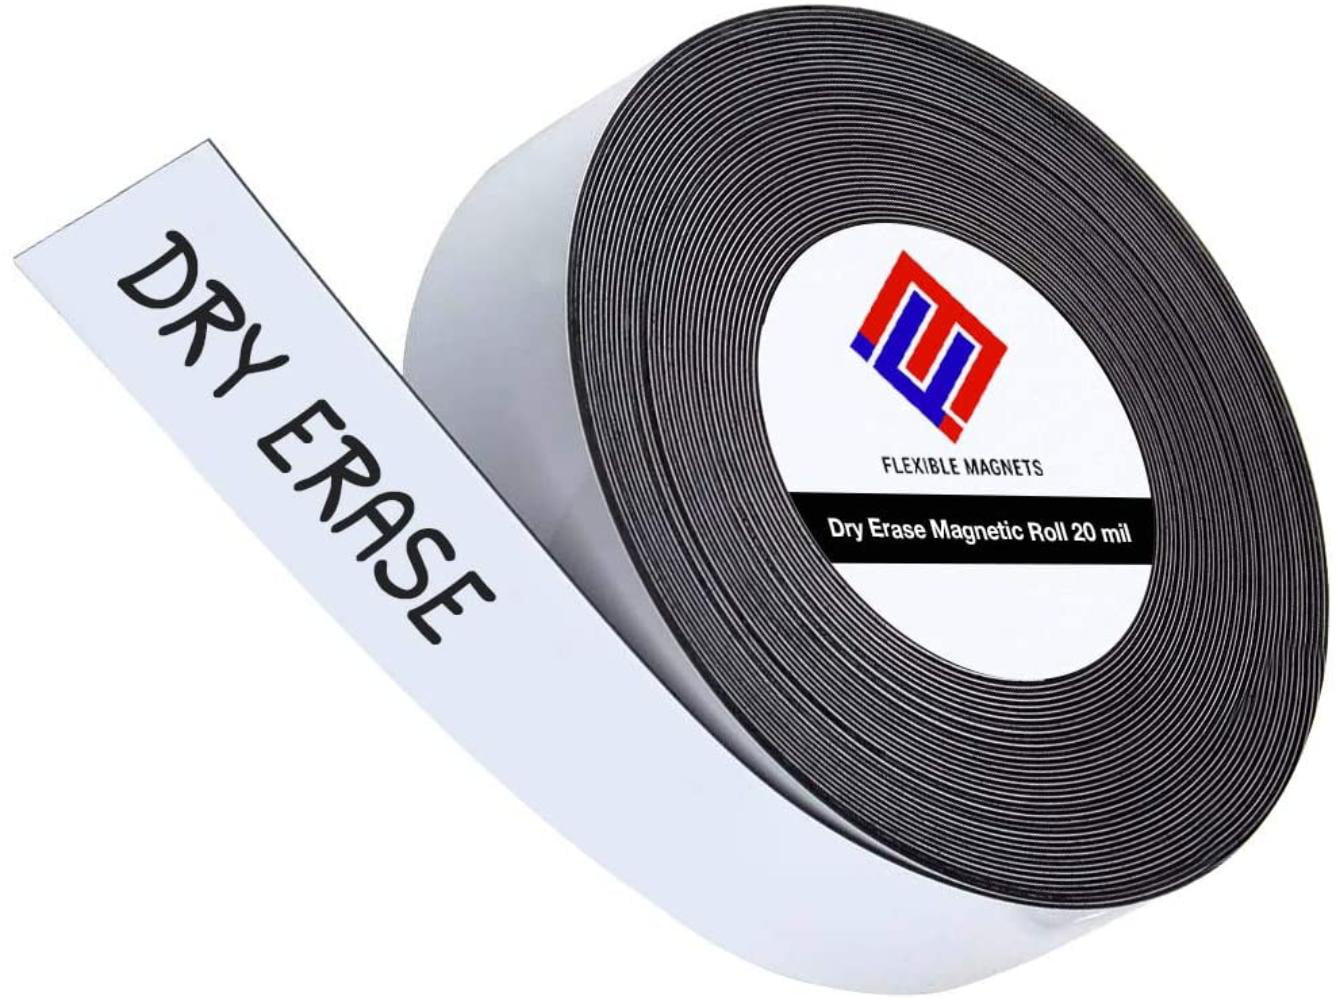 DRY ERASE MAGNET WHITE 3"X10' ROLL .20 MIL MADE IN USA 